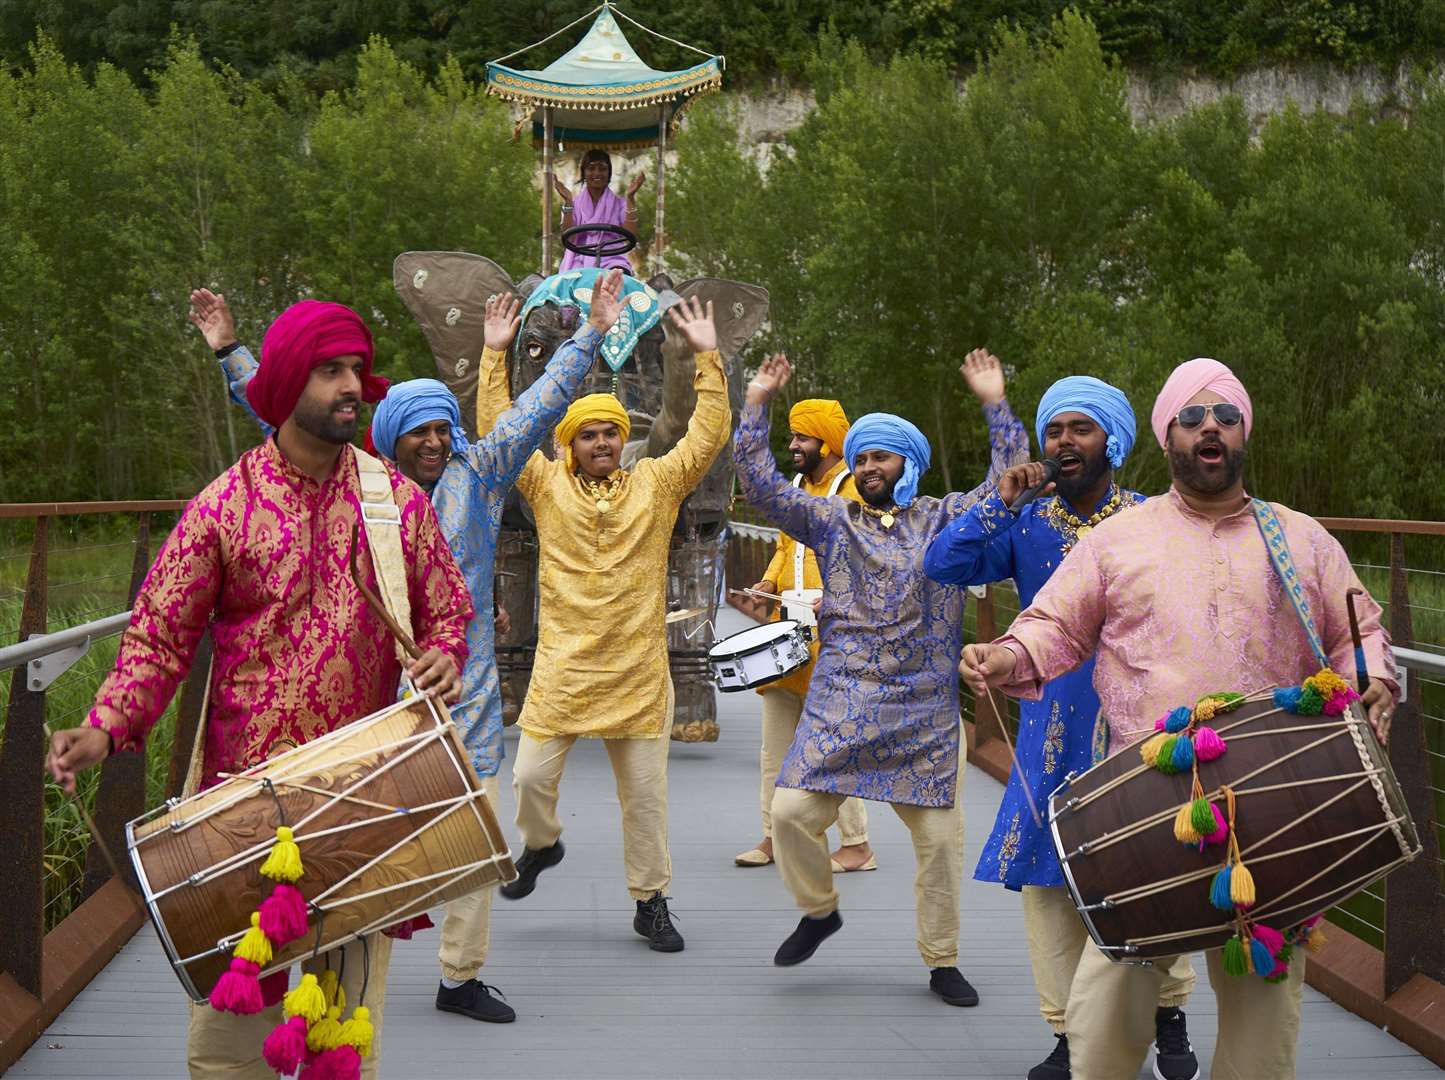 There was a life-size mechanical elephant and Bhangra dancers. PIcture: Sarah Knight